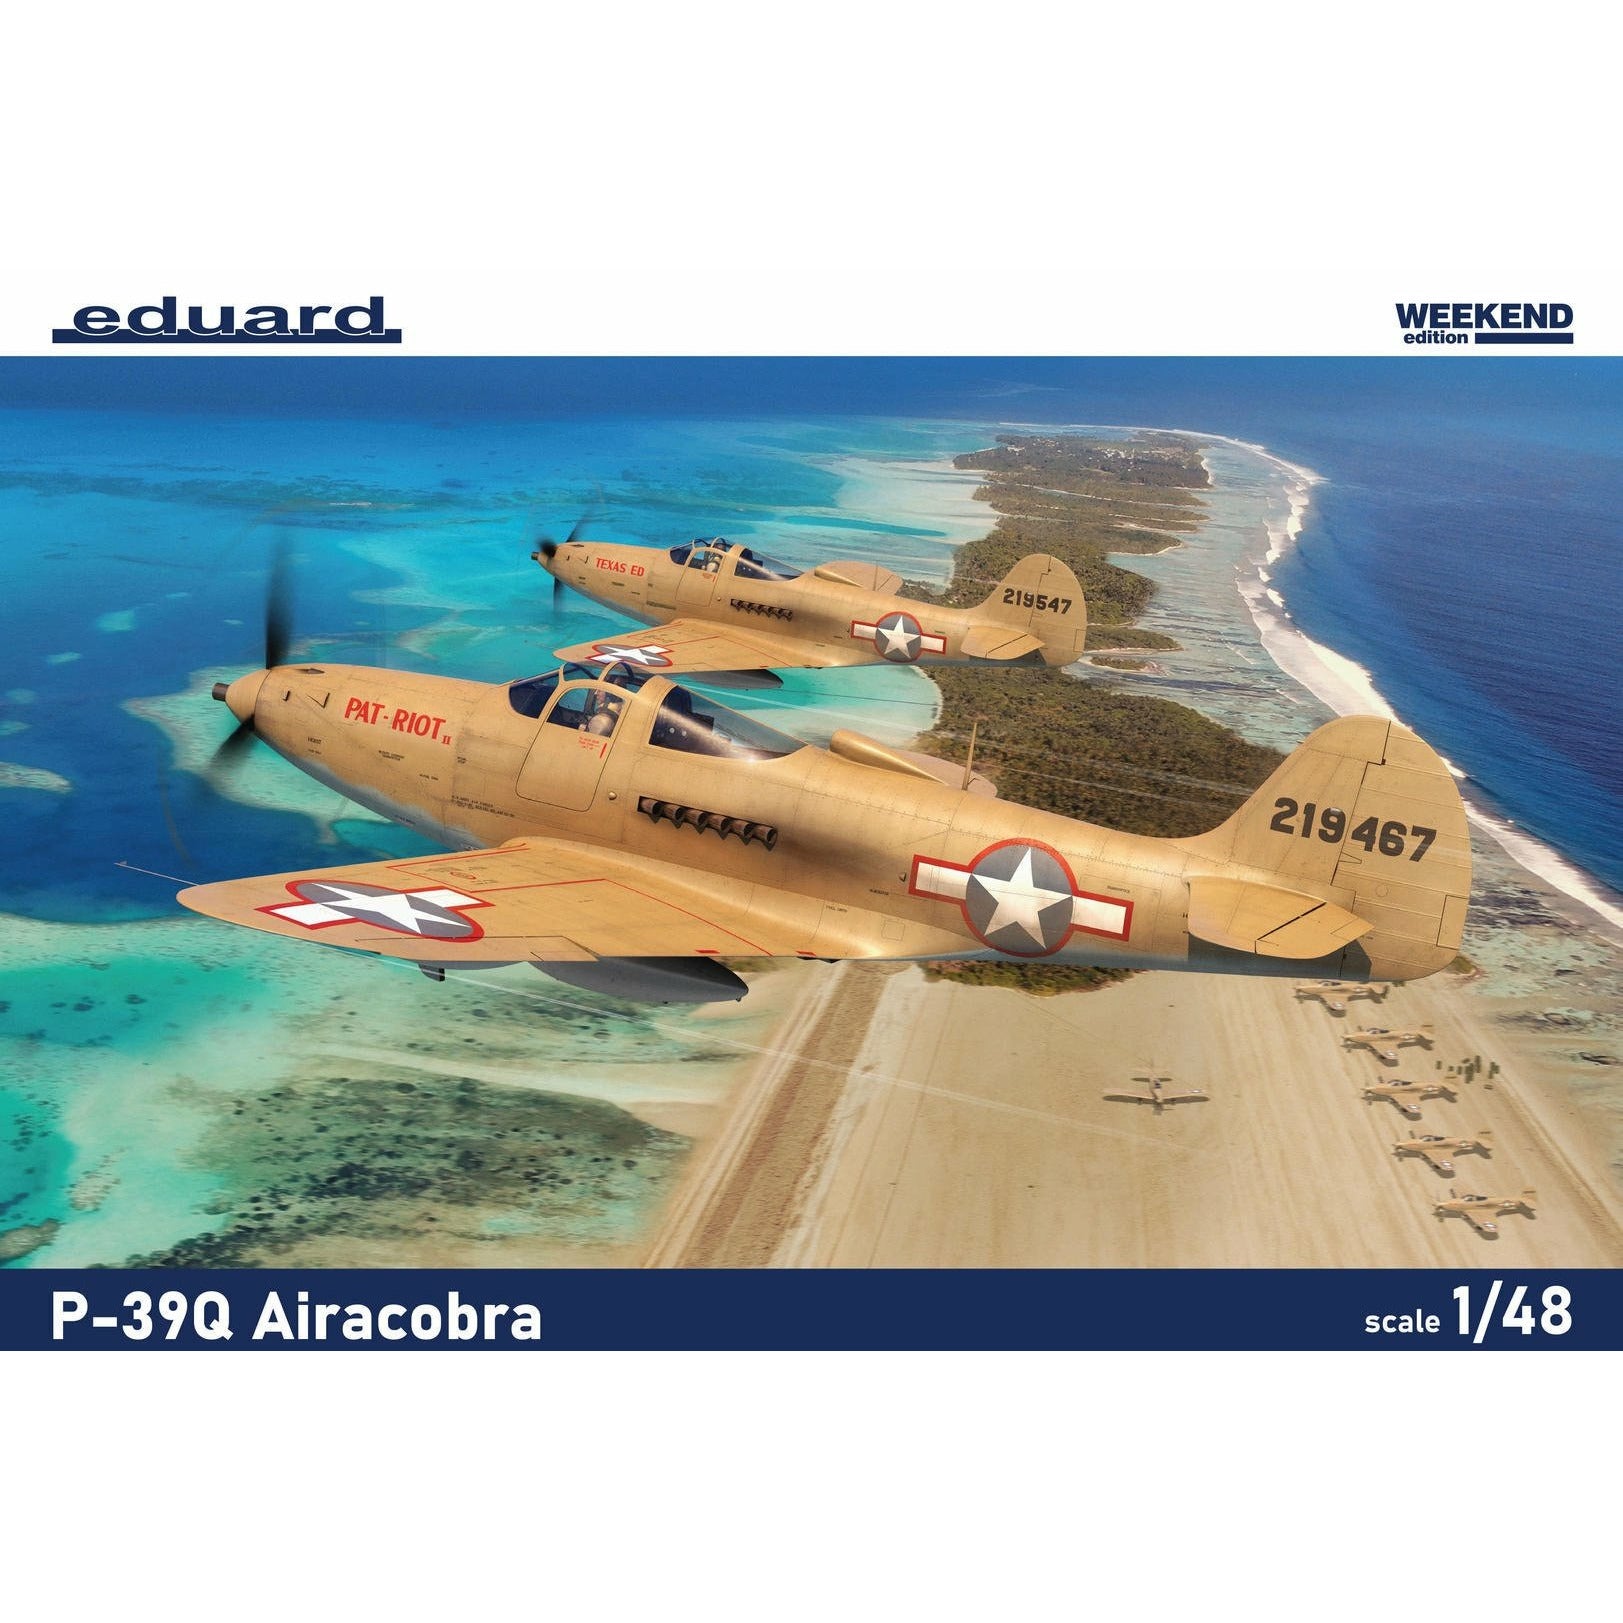 P-39Q Airacobra [Weekend Edition] 1/48 #8470 by Eduard